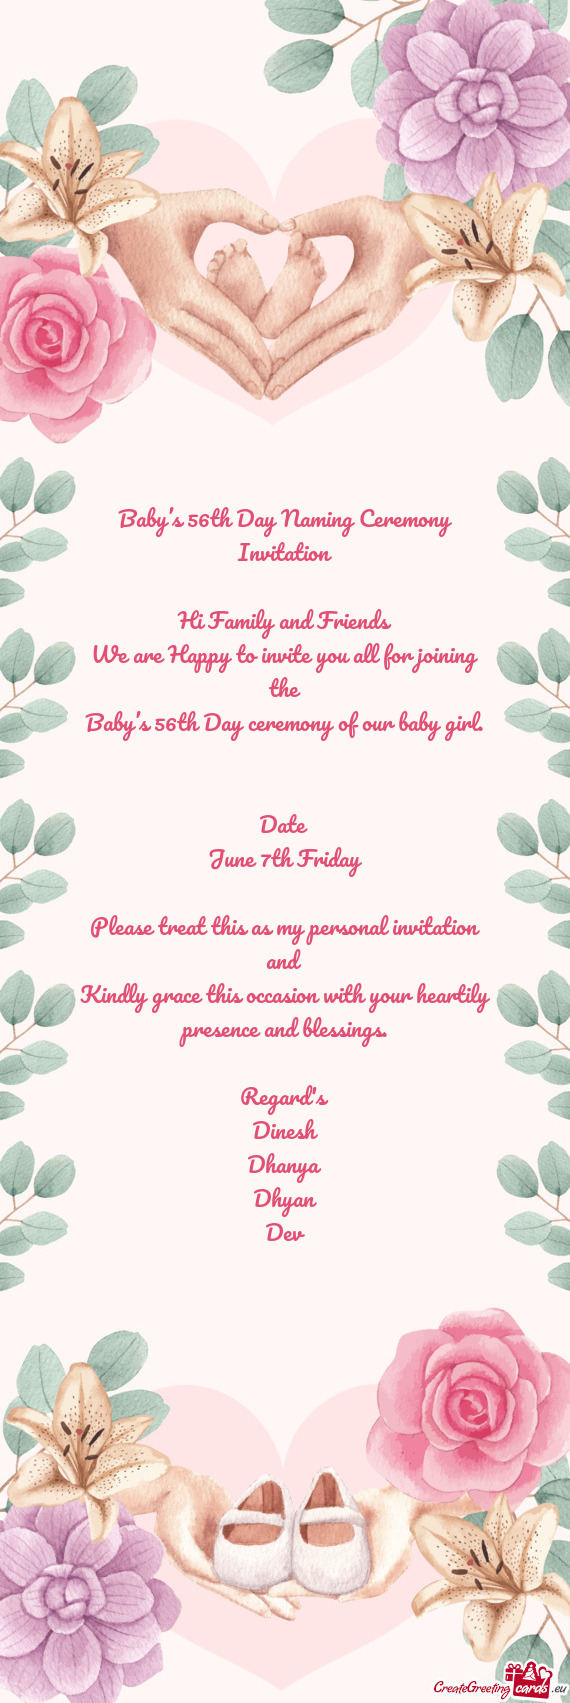 Baby’s 56th Day Naming Ceremony Invitation Hi Family and Friends We are Happy to invite you al